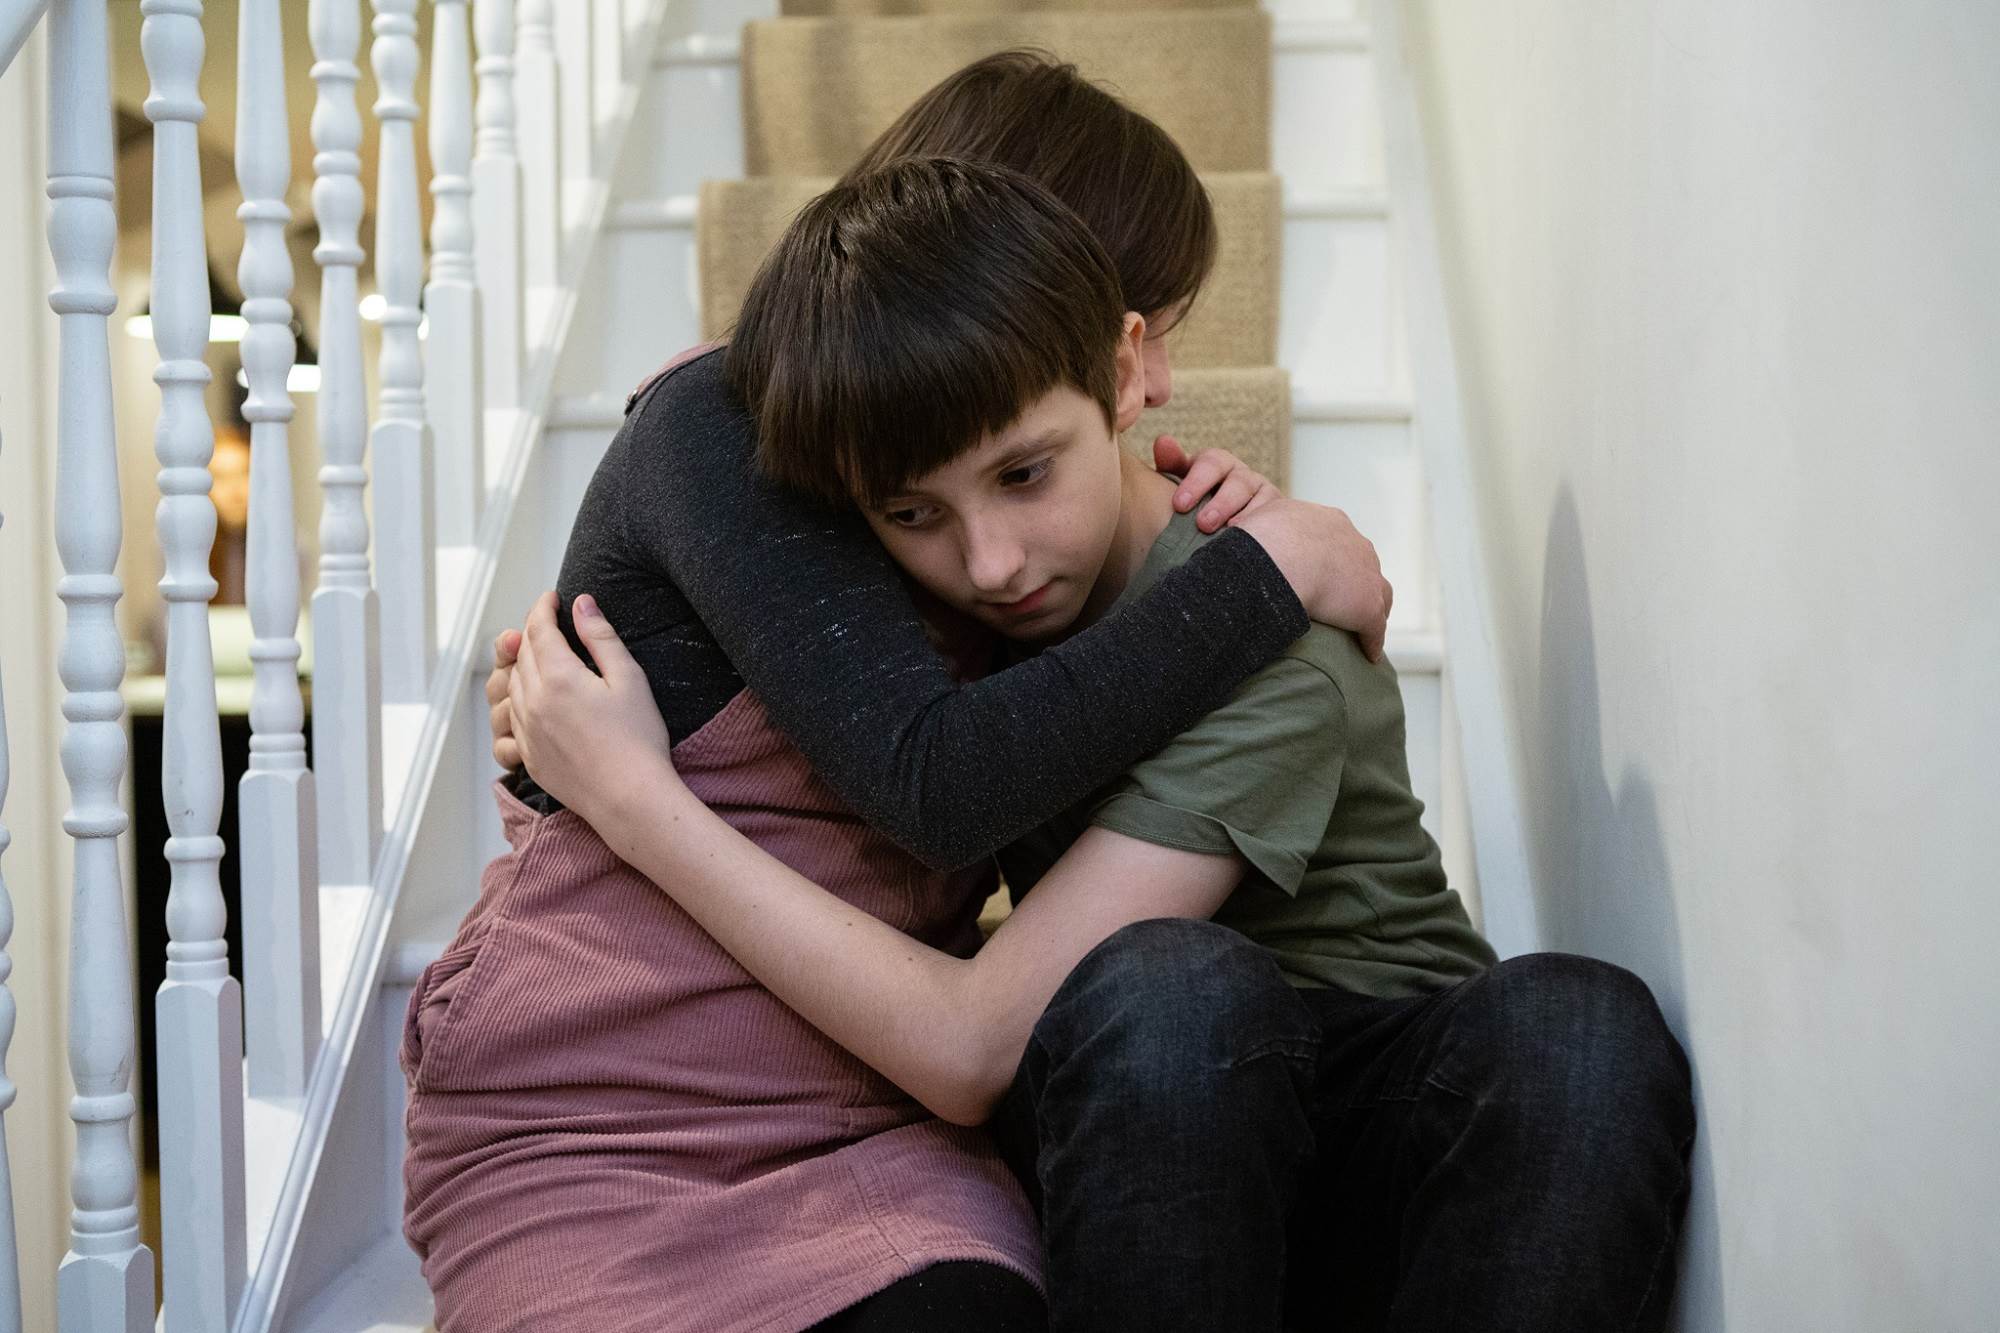 Young Boy Being Hugged On Stairs